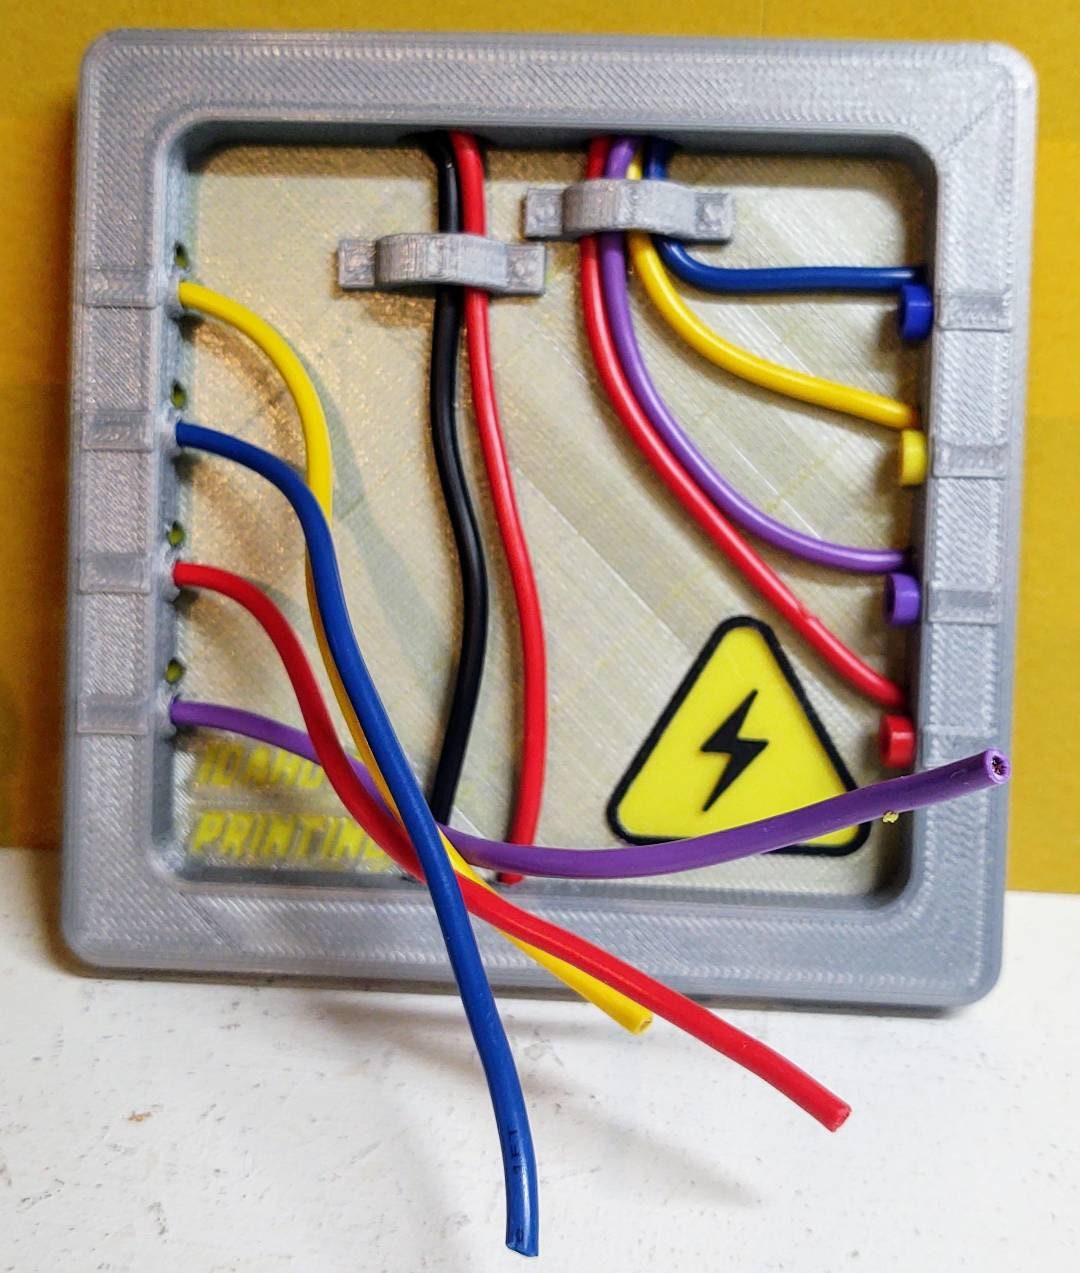 Connect Wiring Puzzle Electrical - Astronaut crewmate